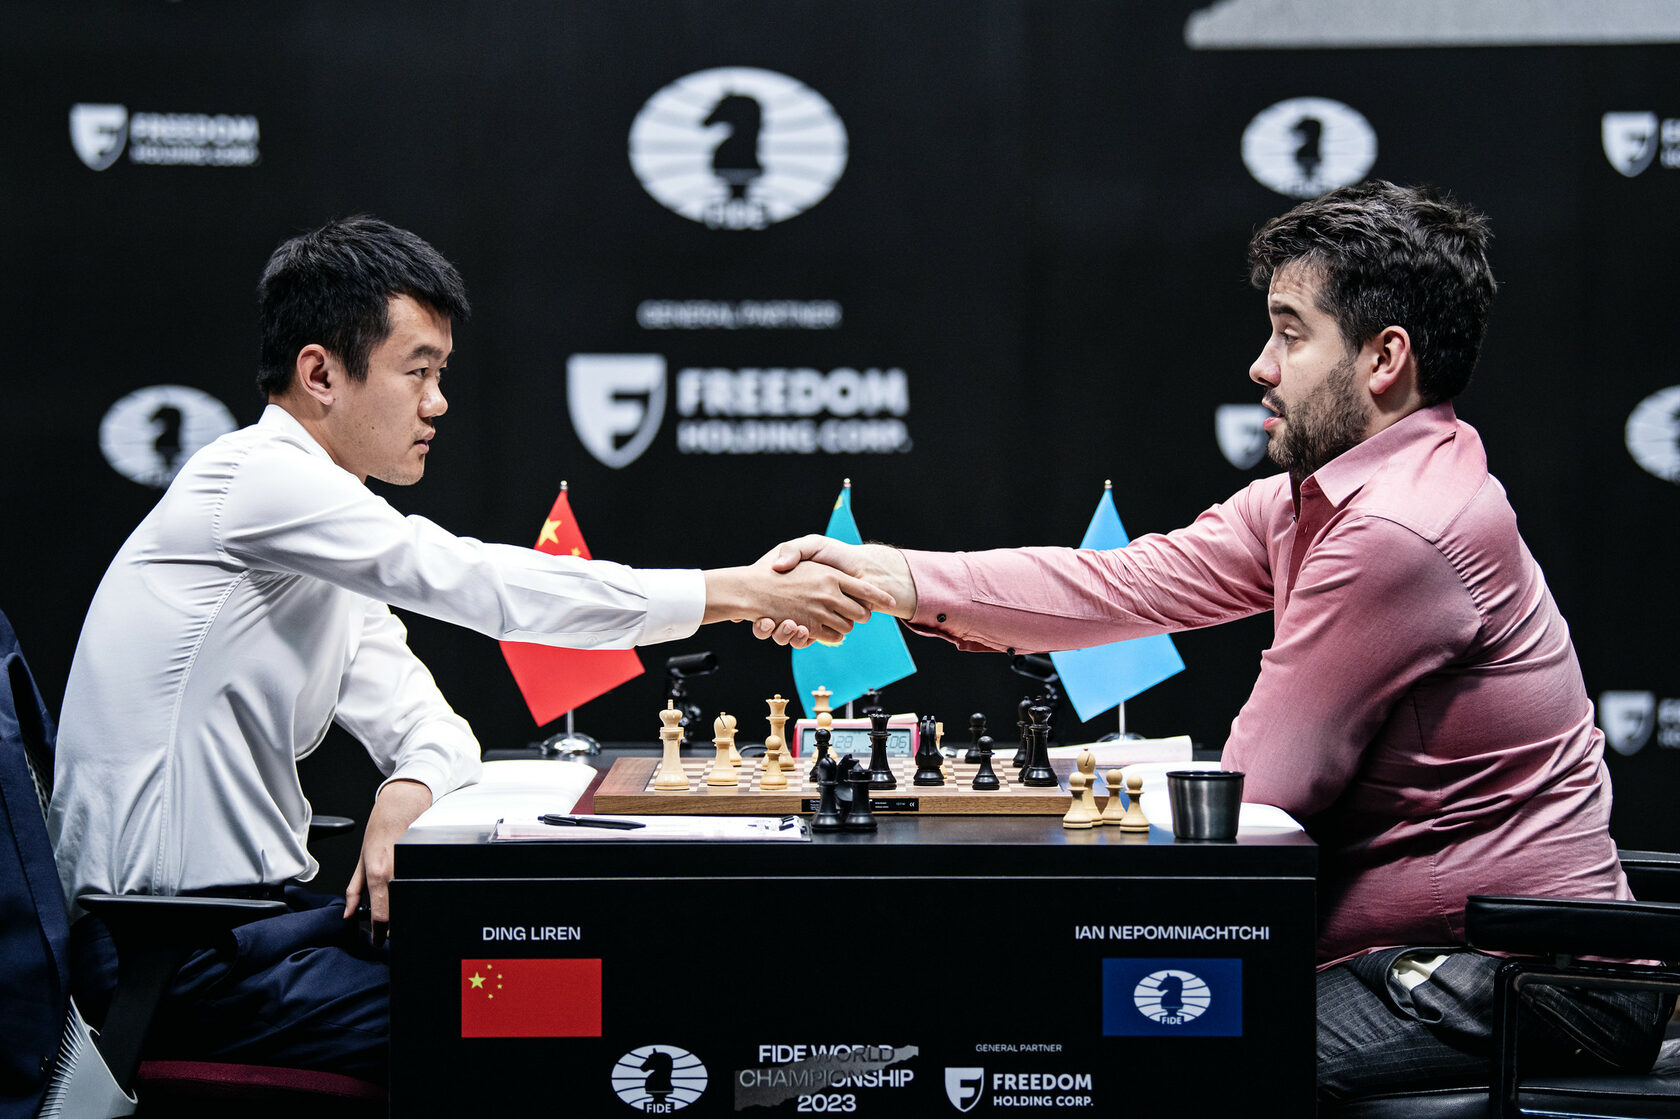 Chess.com on Instagram: Ding Liren wins the 2023 FIDE World Championship  🏆 Congratulations Ding on becoming the new FIDE World Champion, and  cementing his place in chess history after a thrilling match!